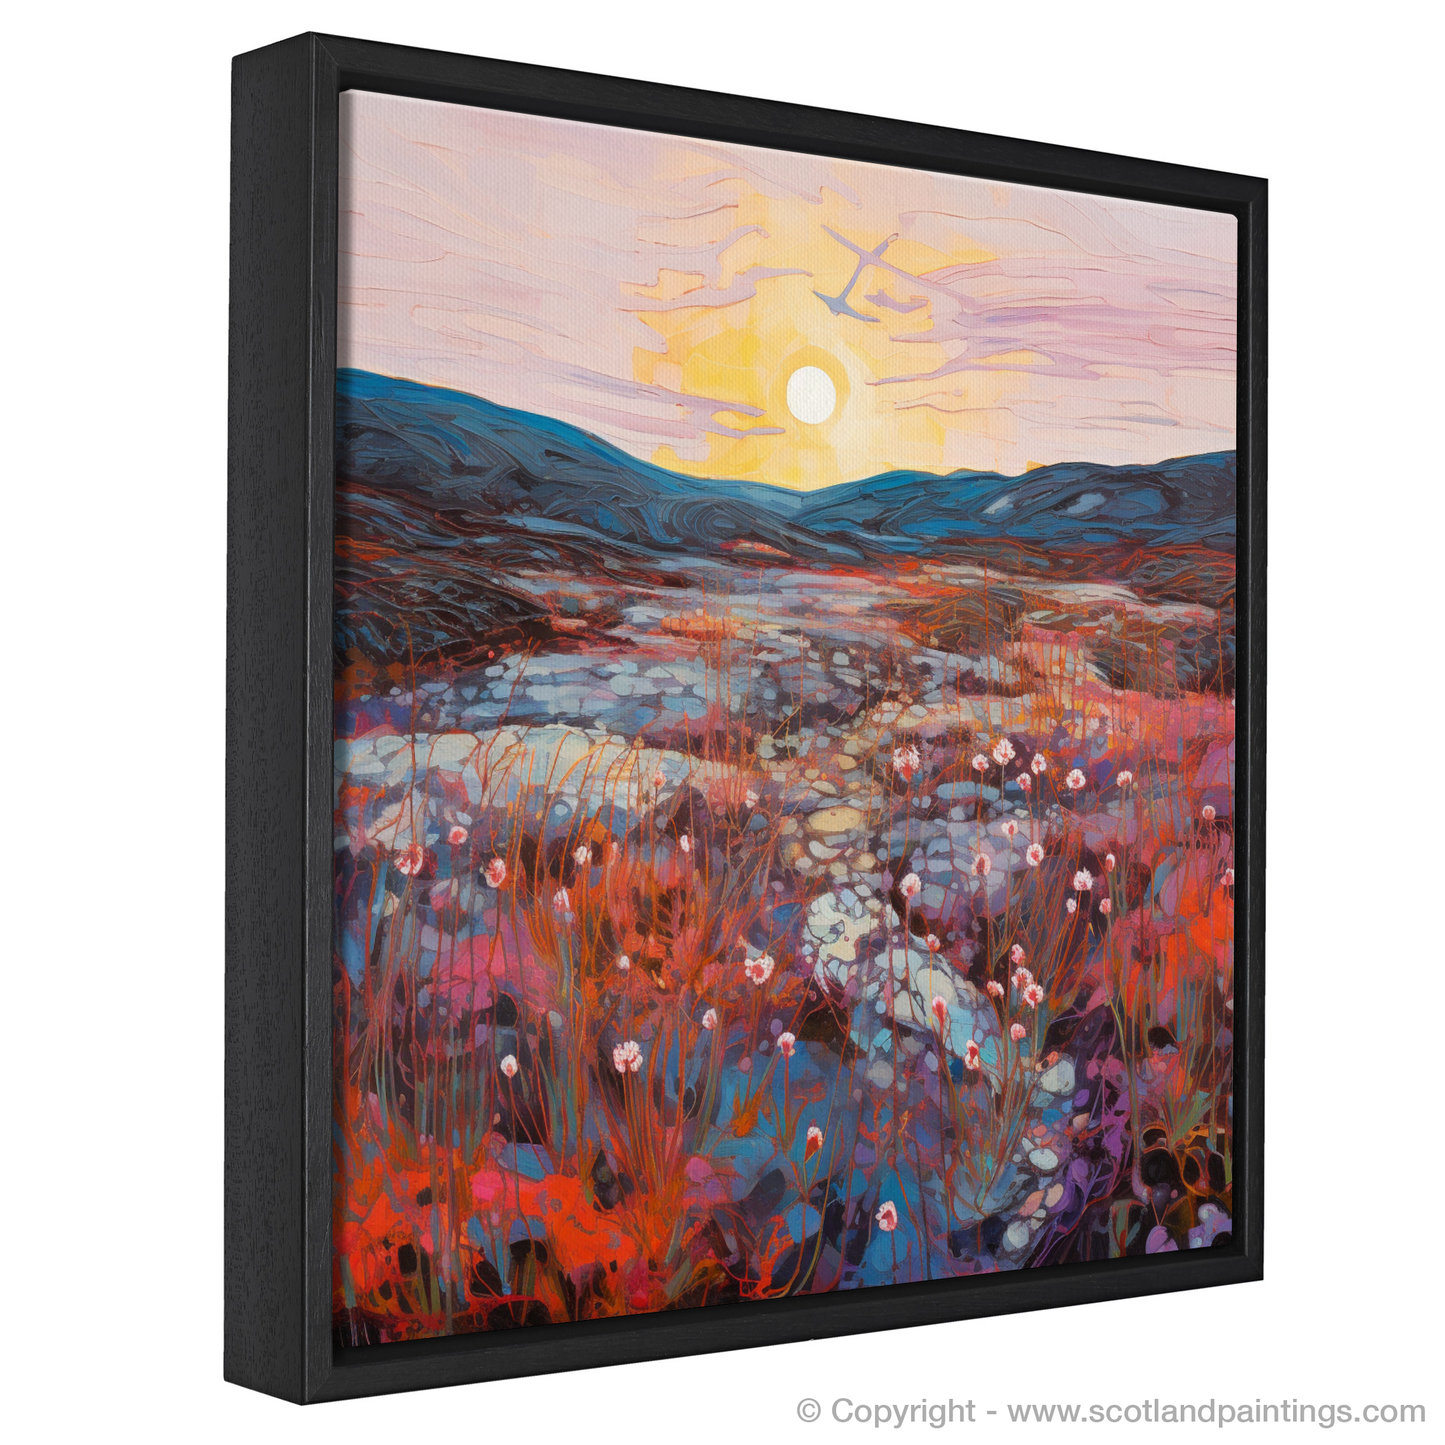 Painting and Art Print of Crowberry patches at dusk in Glencoe entitled "Twilight Dance of Crowberry Patches in Glencoe".